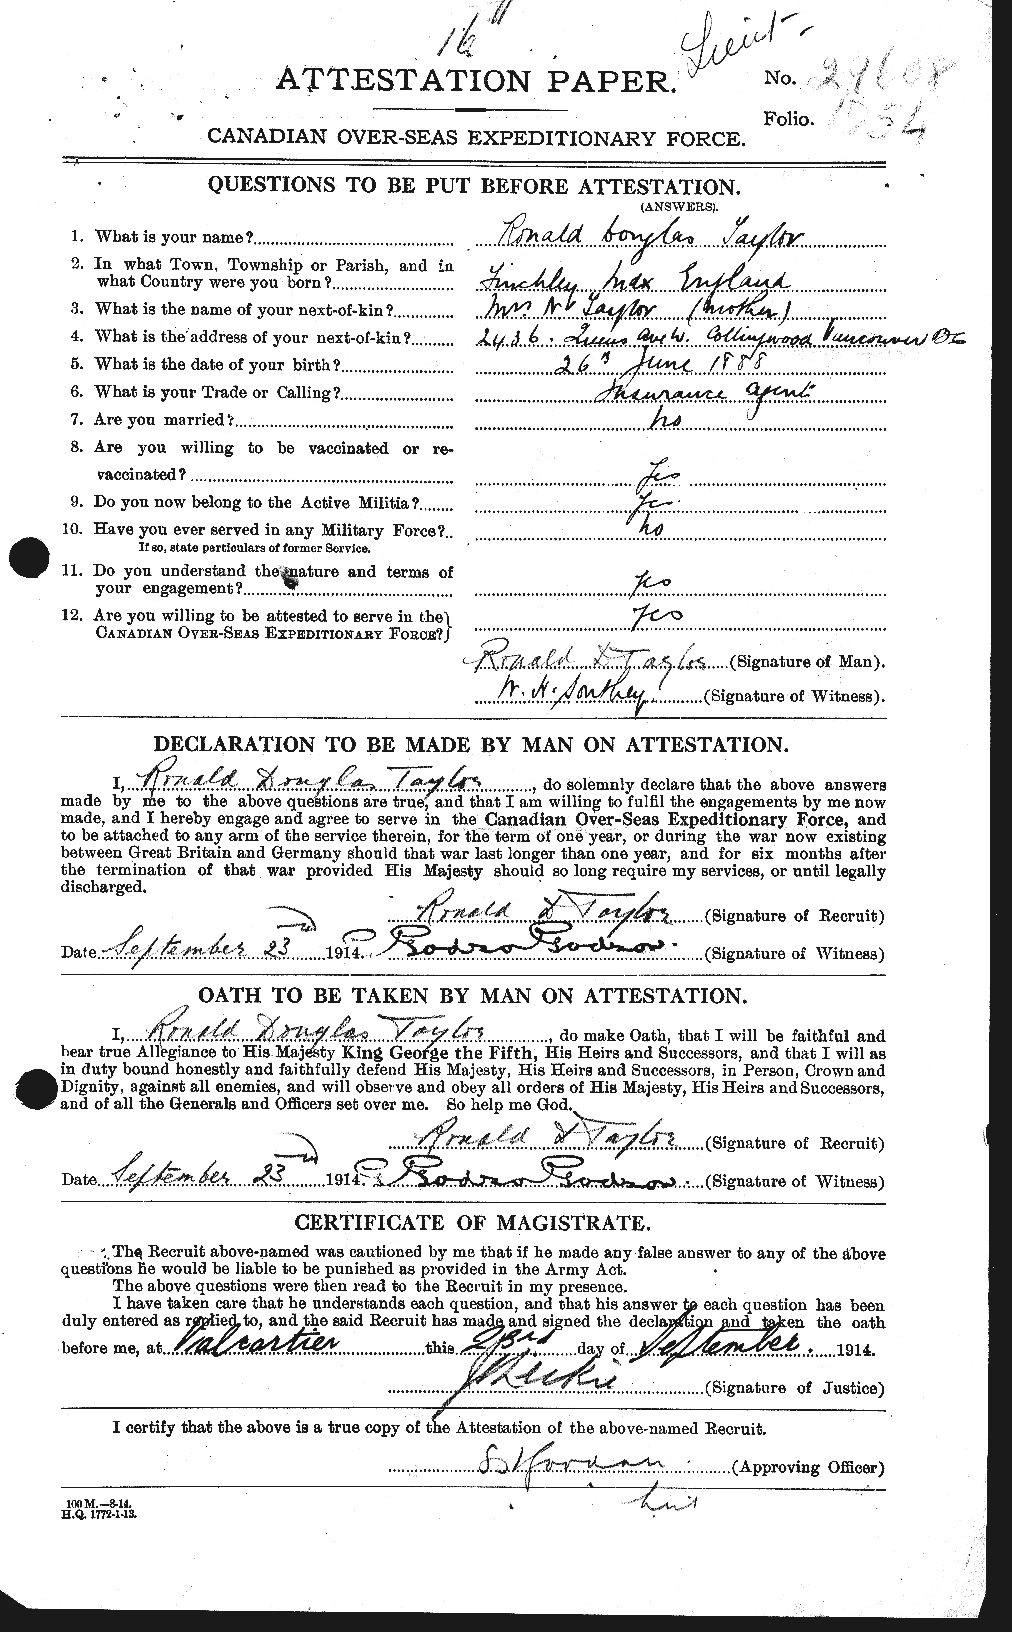 Personnel Records of the First World War - CEF 627509a